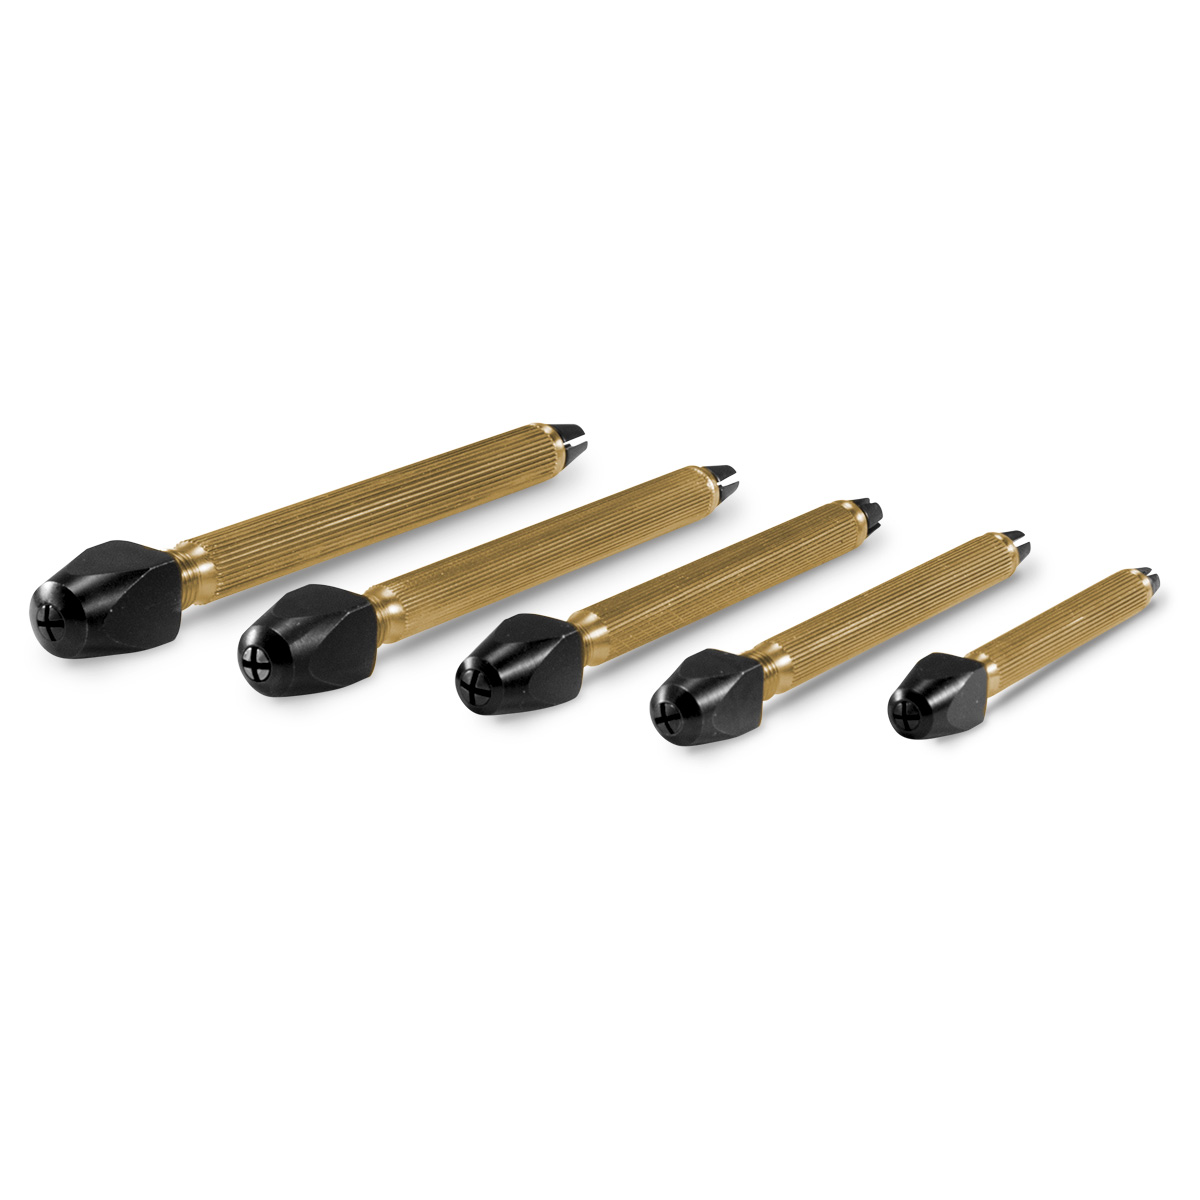 Set of 5 pieces Pin vices brass with 2 chucks